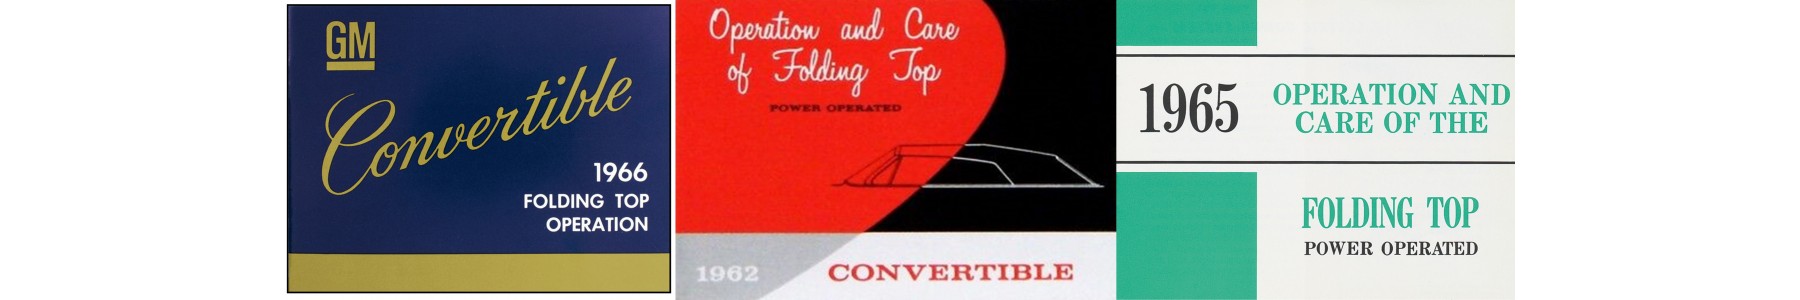 FOLDING TOP BOOKLETS